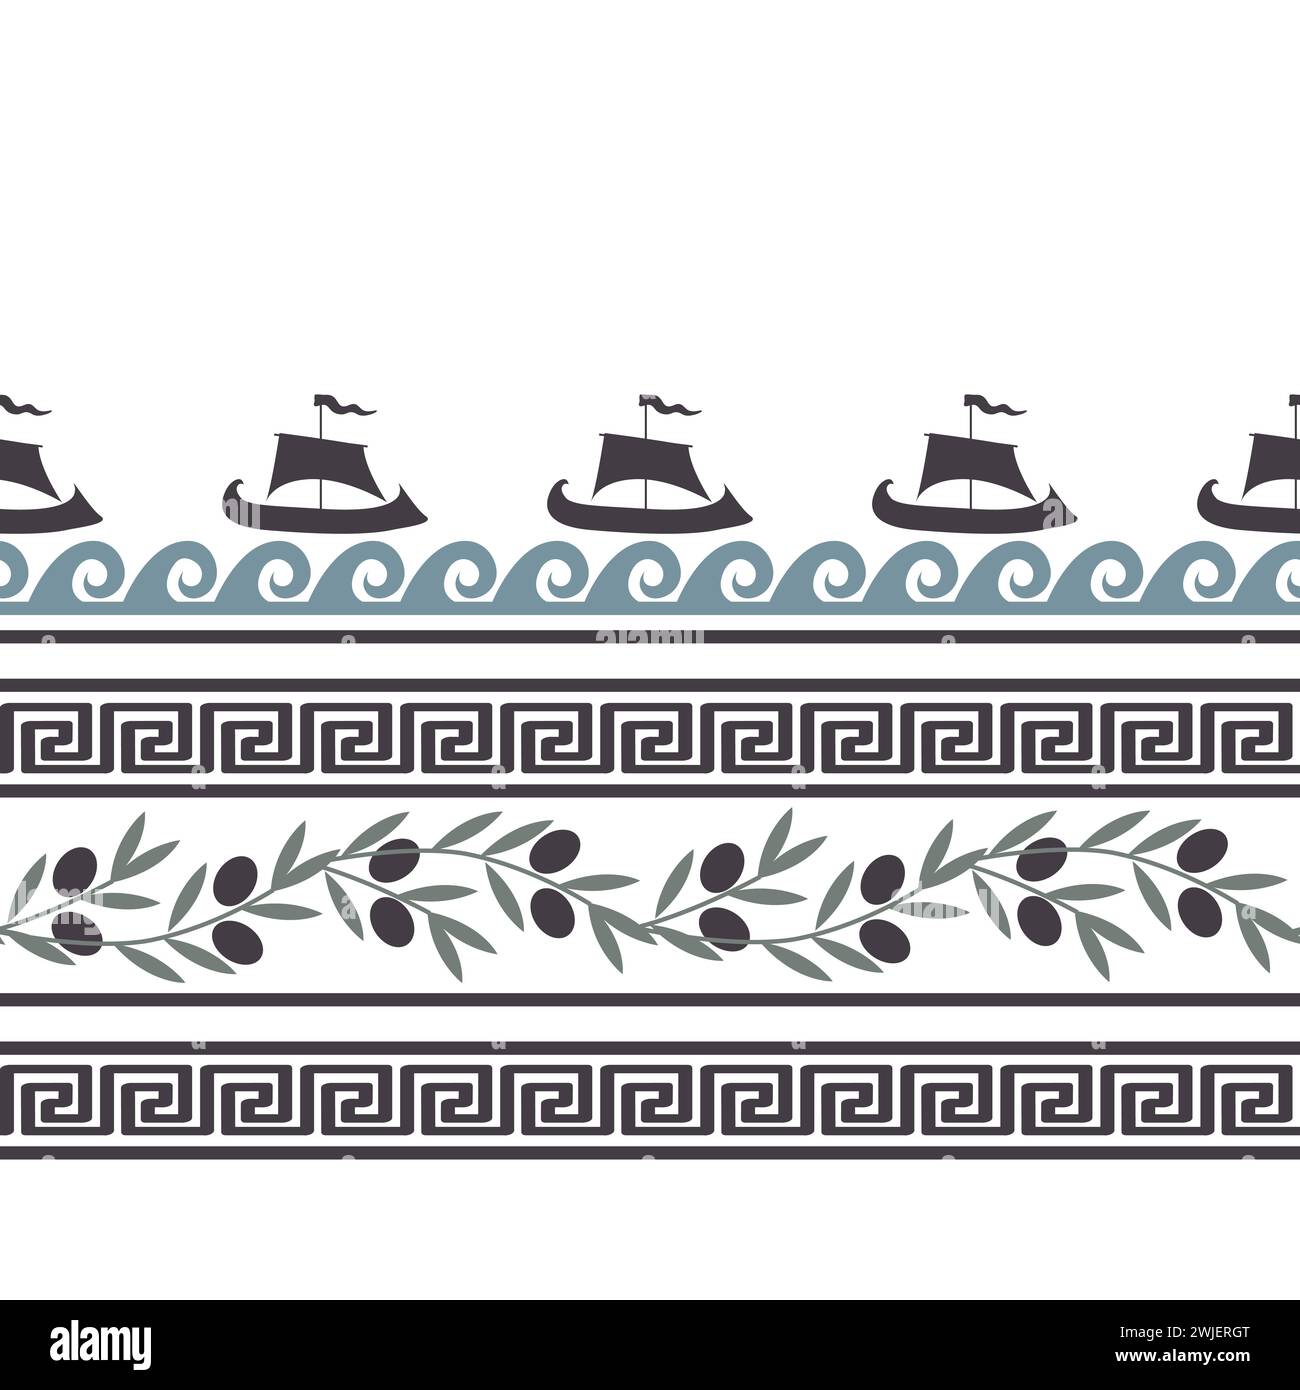 Seamless pattern with olives, waves, ships, and Greek symbols. Rich ancient stylized ornament, vector illustration Stock Vector